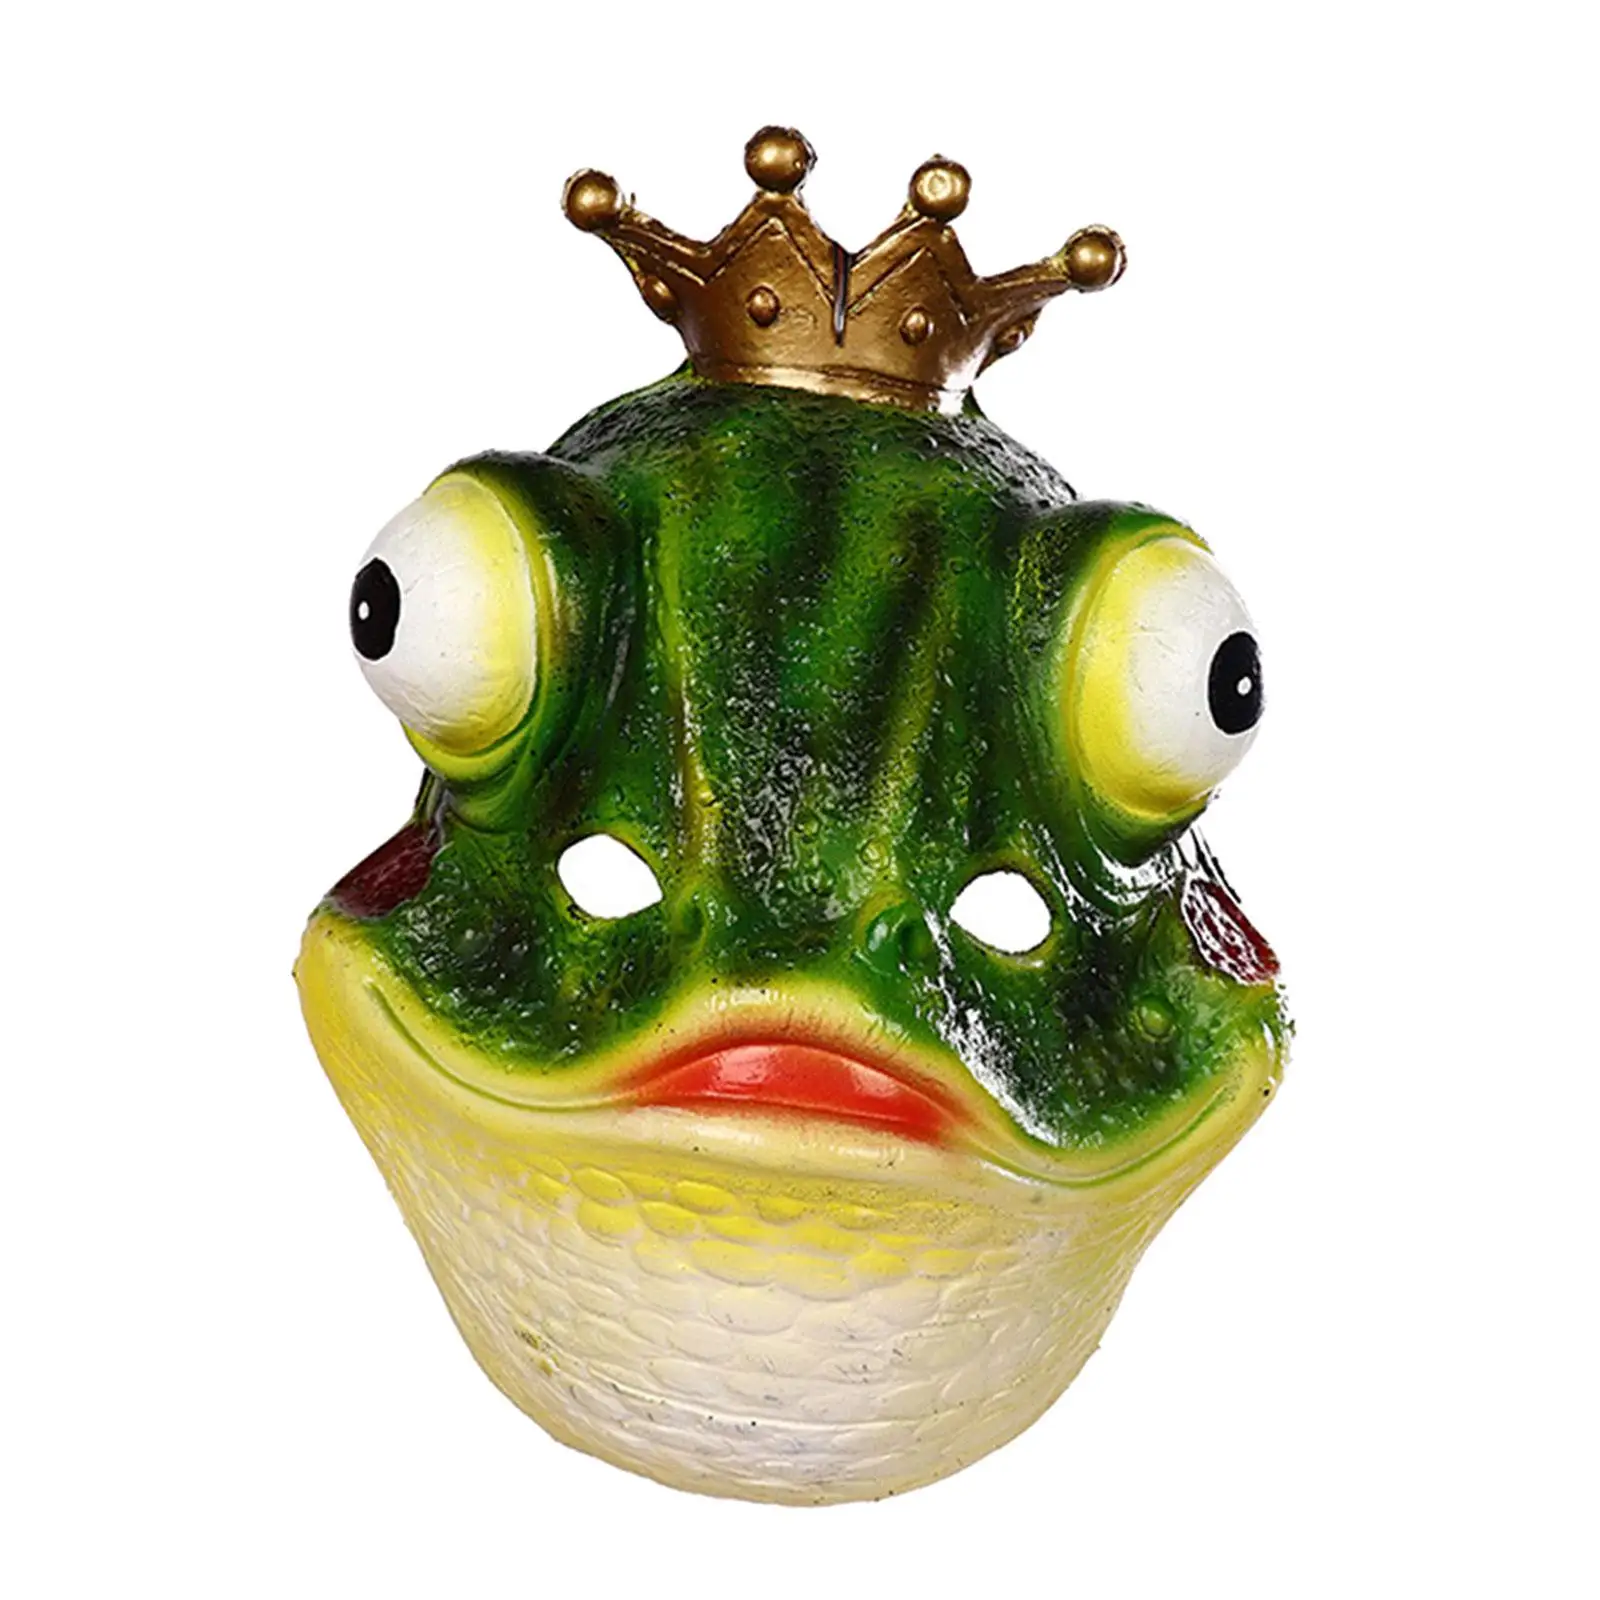 Frog Mask Cosplay Costume Props Headgear Adults Novelty Masquerade Mask Animal Mask for Festival Prom Night Club Party Halloween